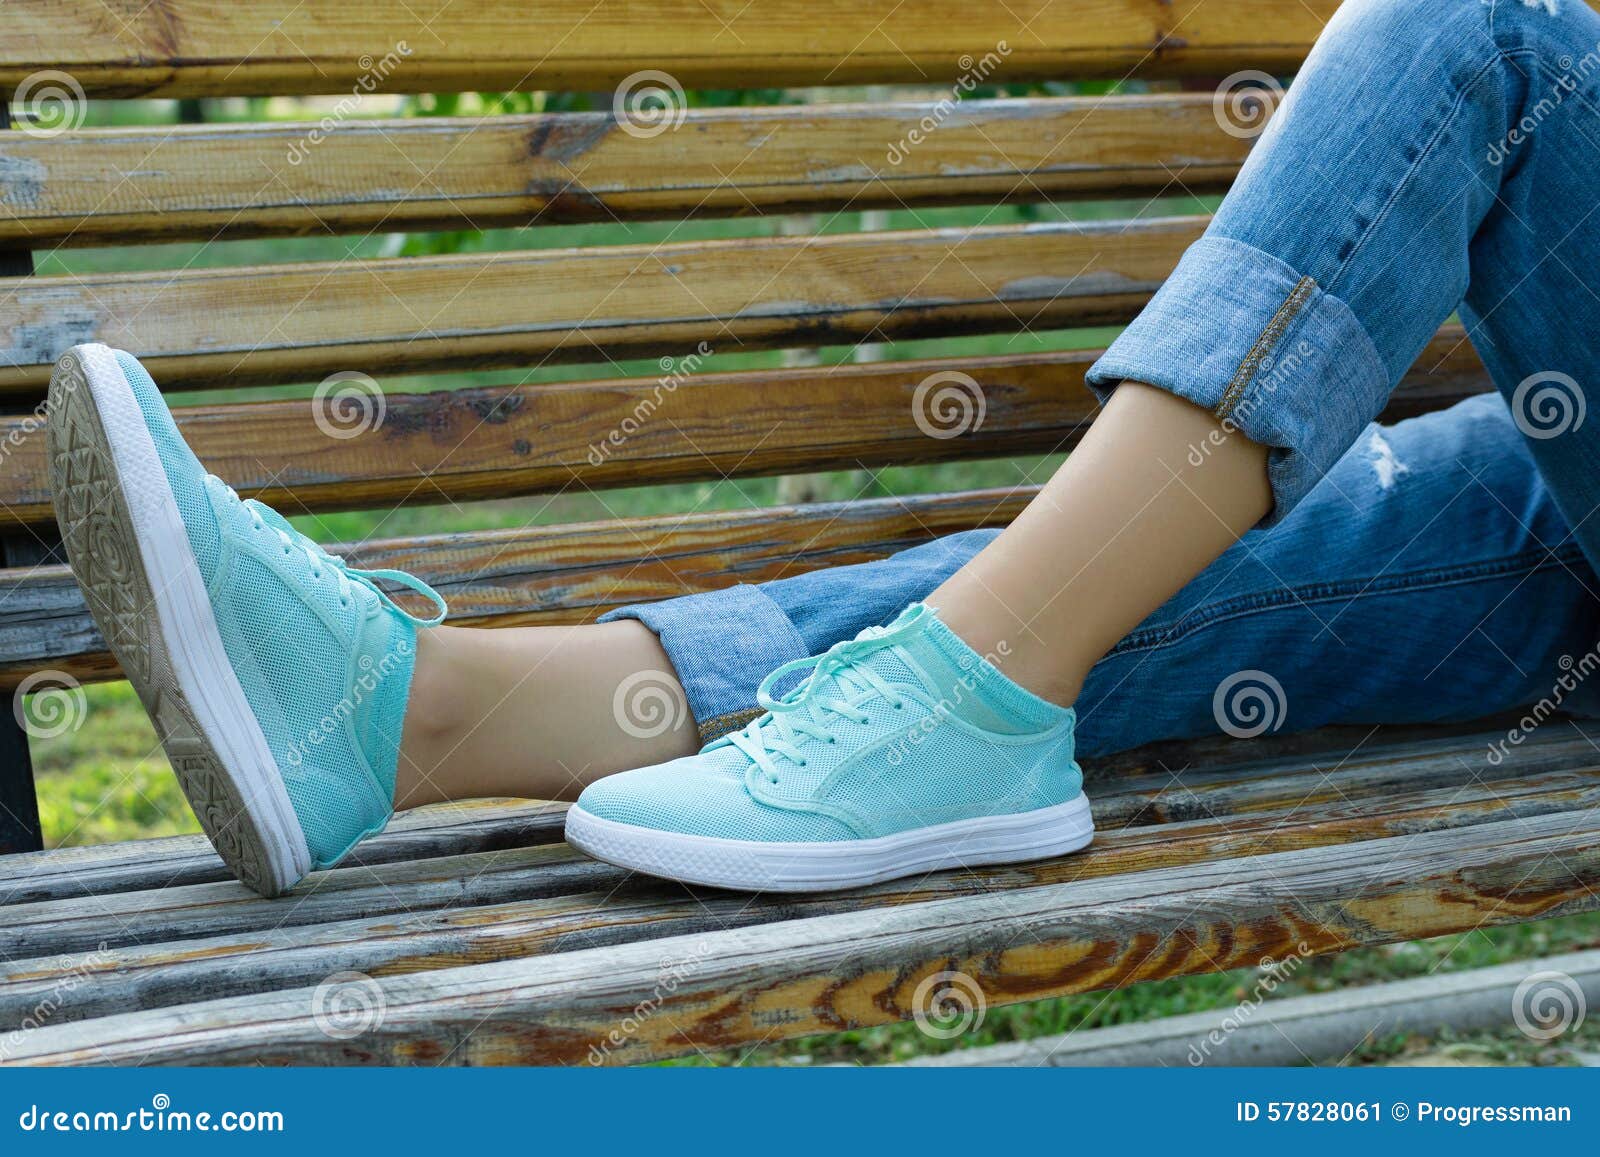 Female Feet in Jeans and Sports Shoes on a Bench Close-up Stock Image ...